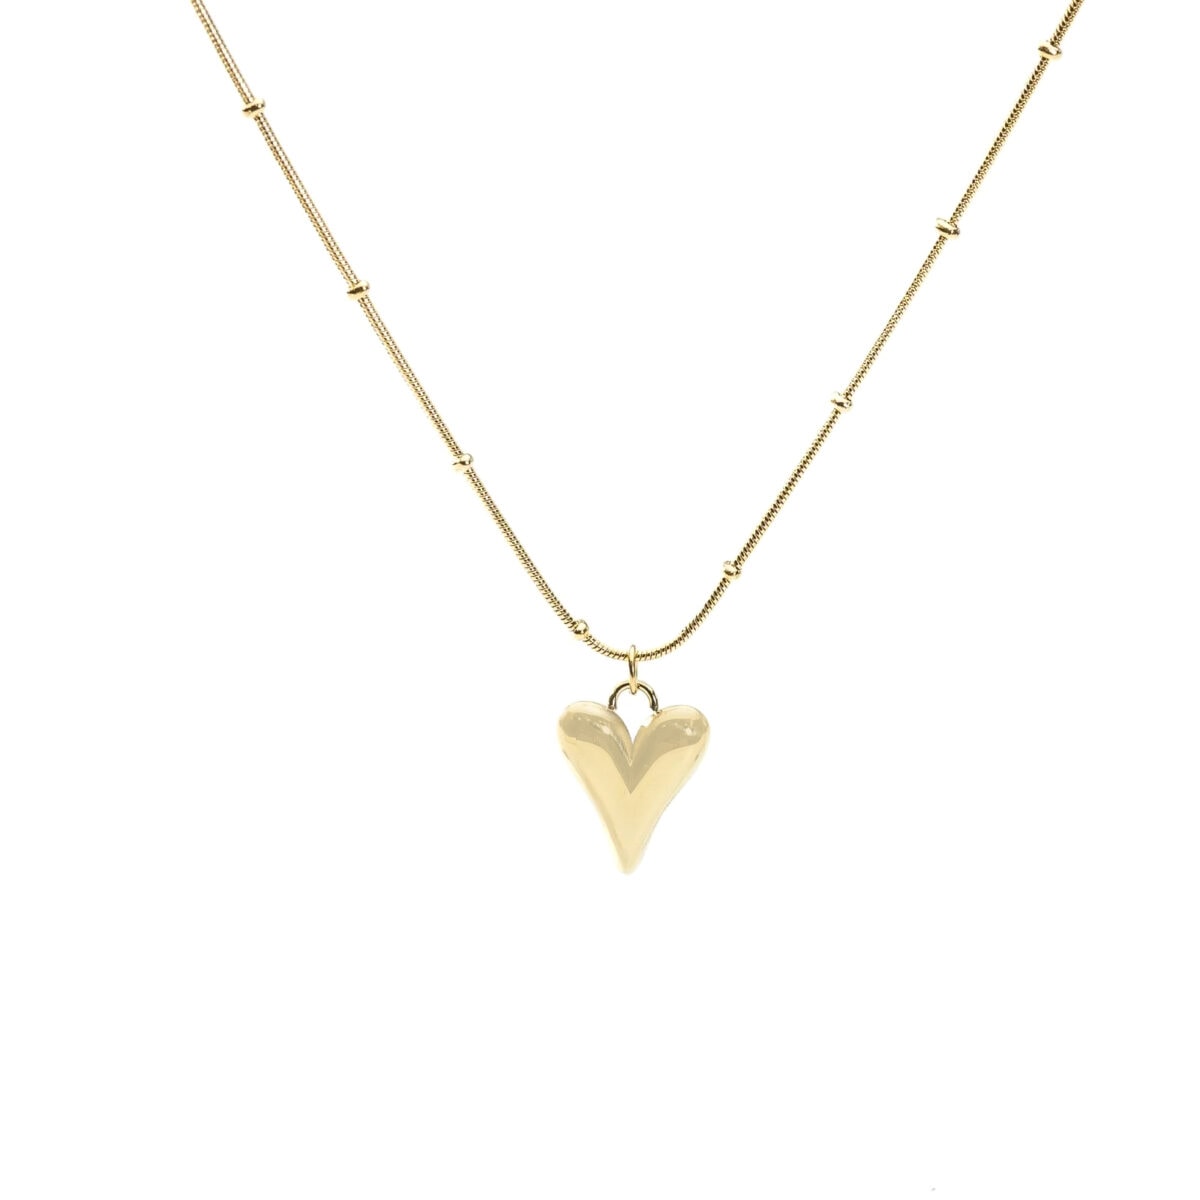 https://m.clubbella.co/product/heart-charm-beaded-gold-necklace/ Heart Charm Beaded Gold Necklace